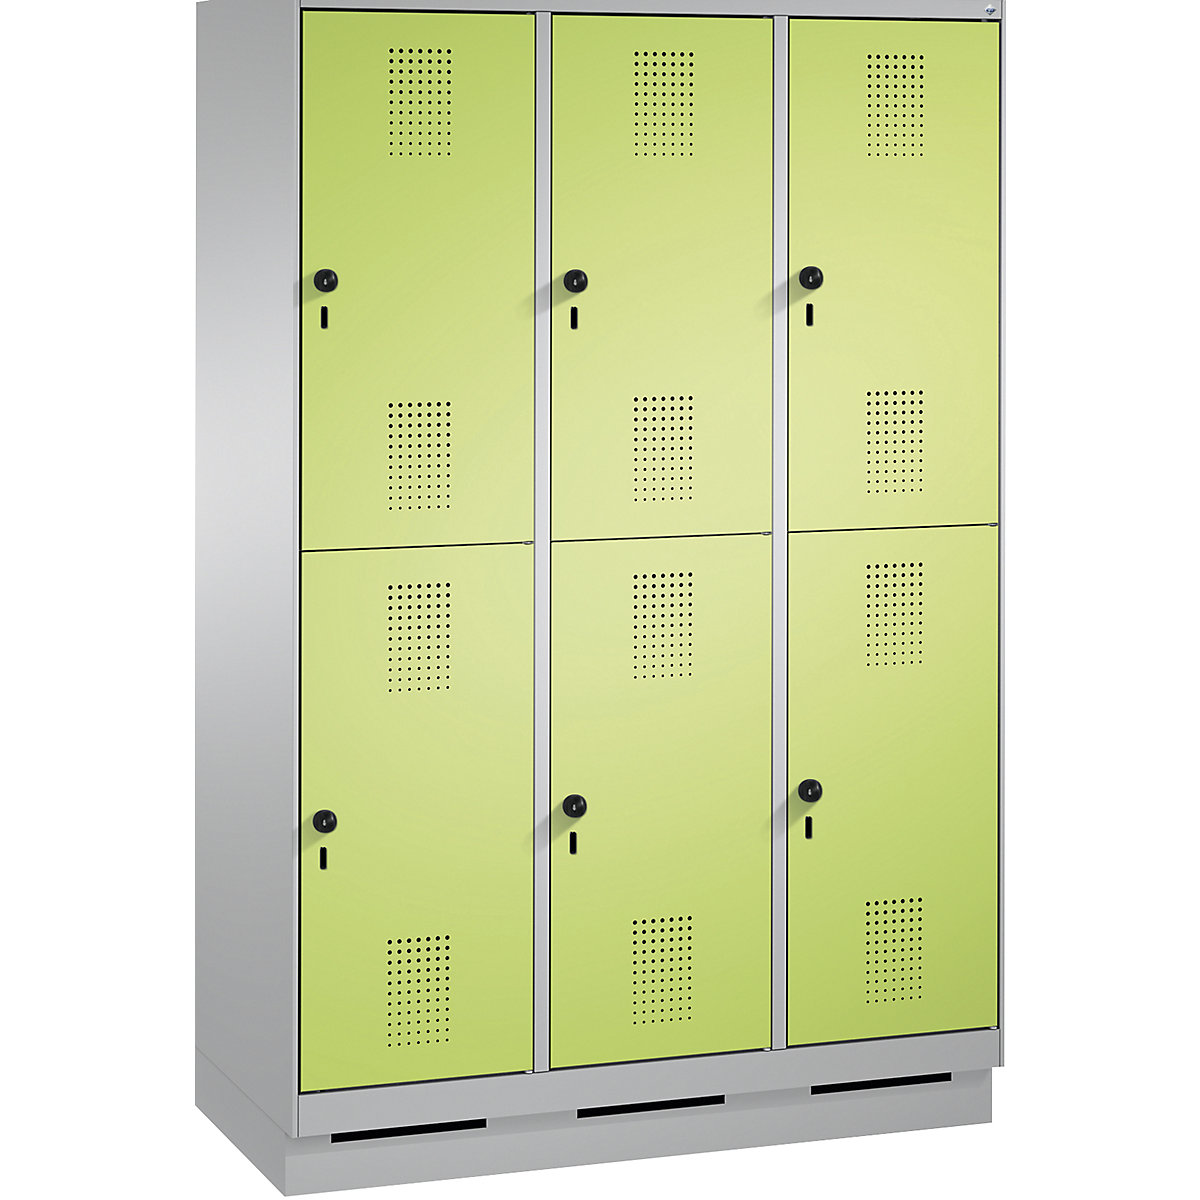 EVOLO cloakroom locker, double tier, with plinth – C+P, 3 compartments, 2 shelf compartments each, compartment width 400 mm, white aluminium / viridian green-4